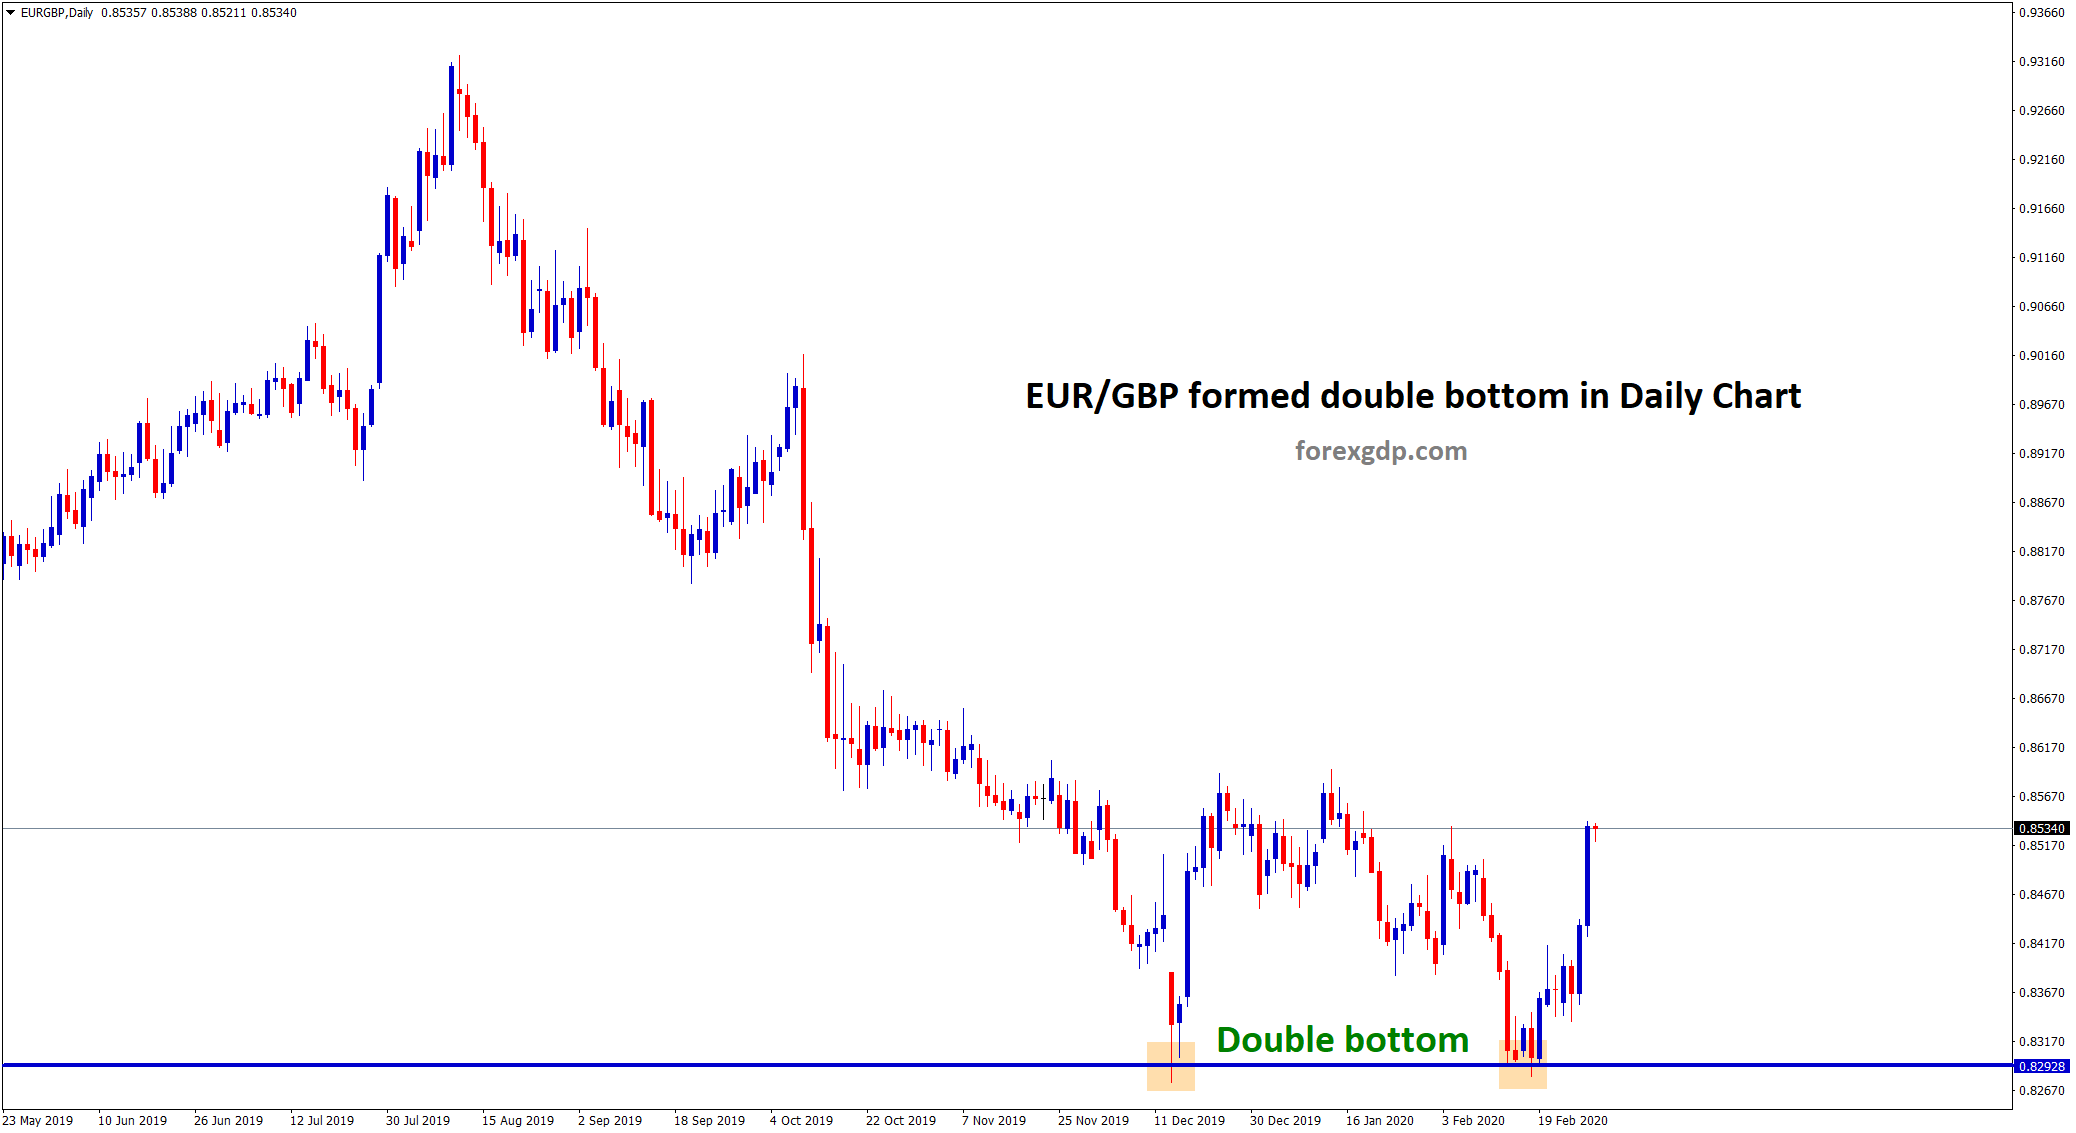 Double bottom formed in EUR GBP forex chart